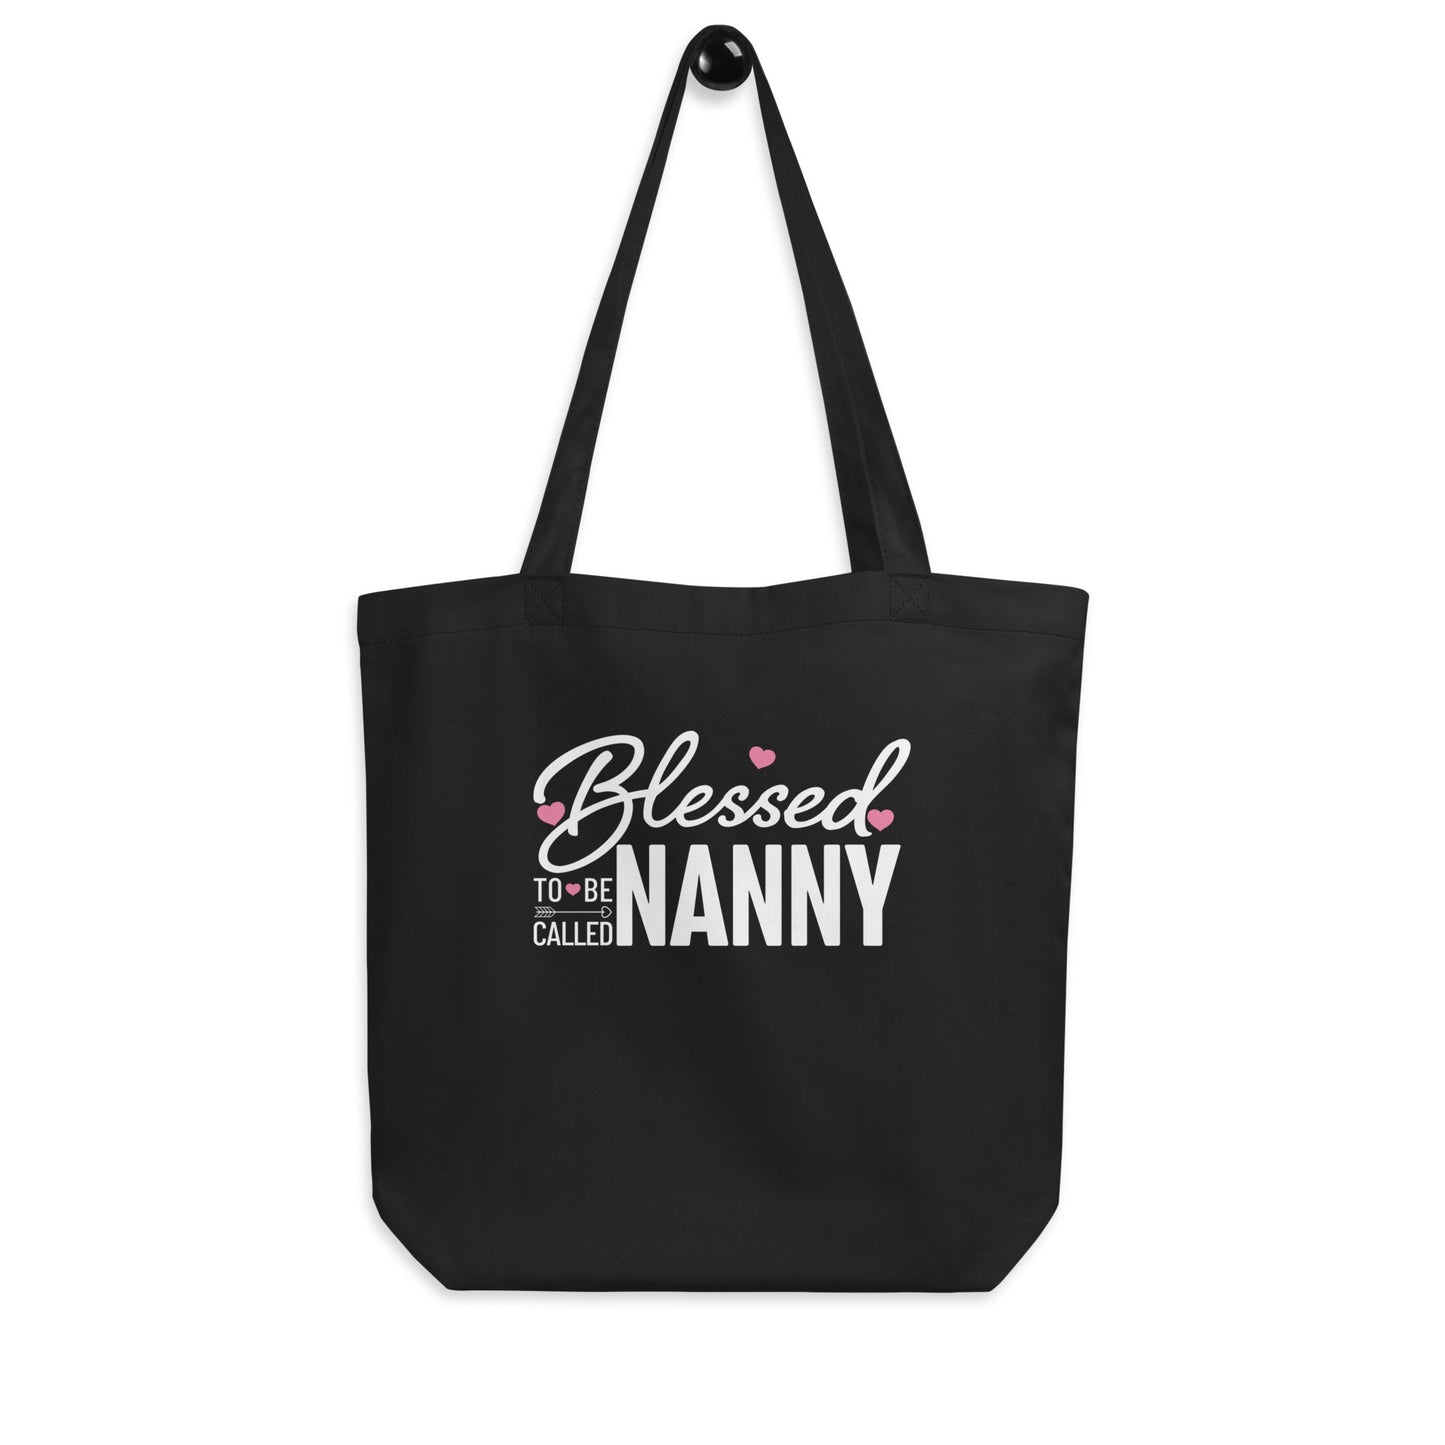 Blessed to be called Nanny Eco Tote Bag